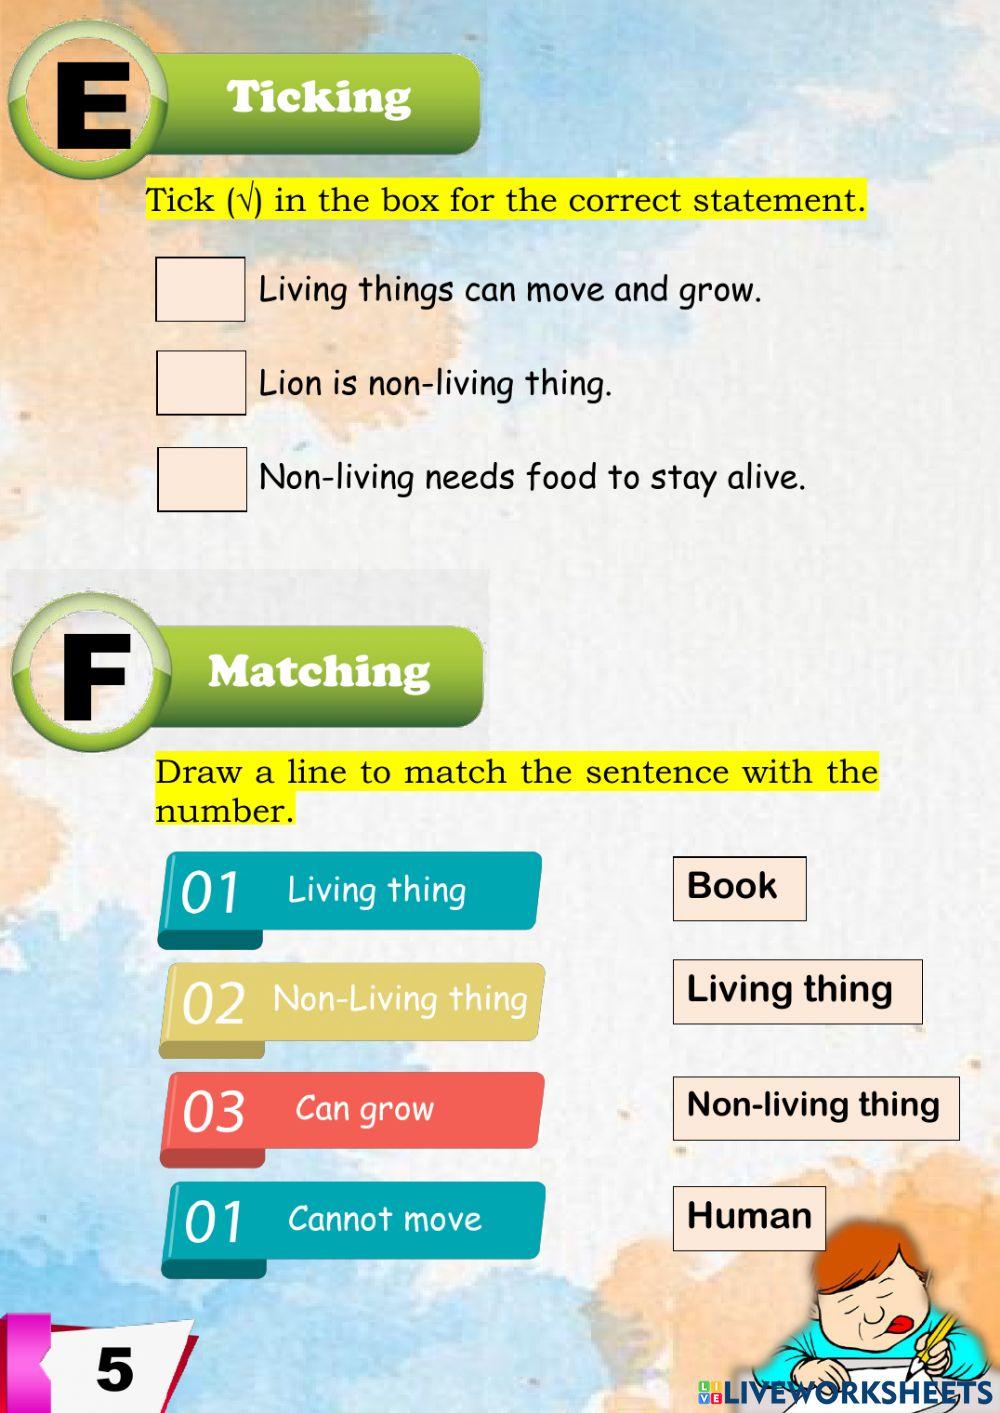 Science-Grade 1 : Living & Non Living Things